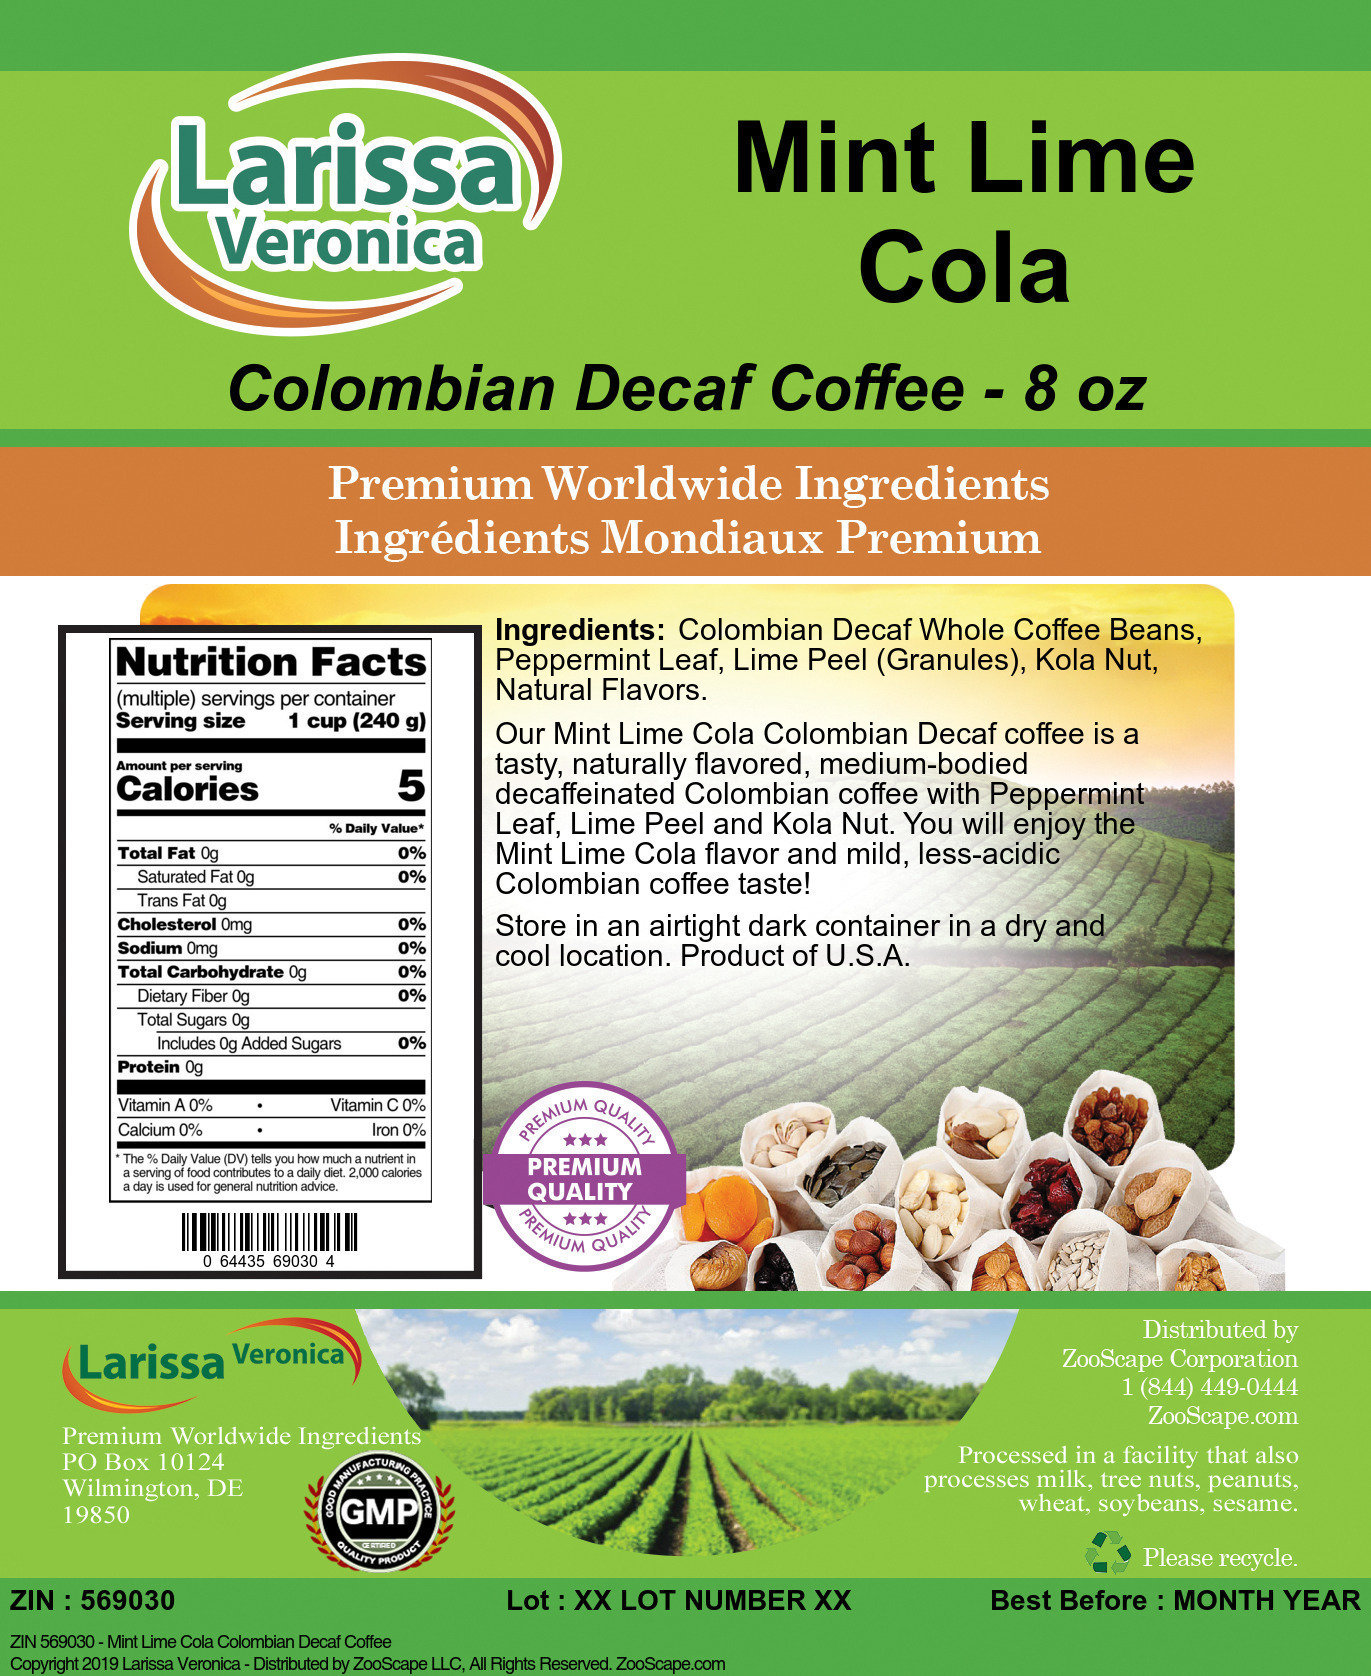 Mint Lime Cola Colombian Decaf Coffee - Label